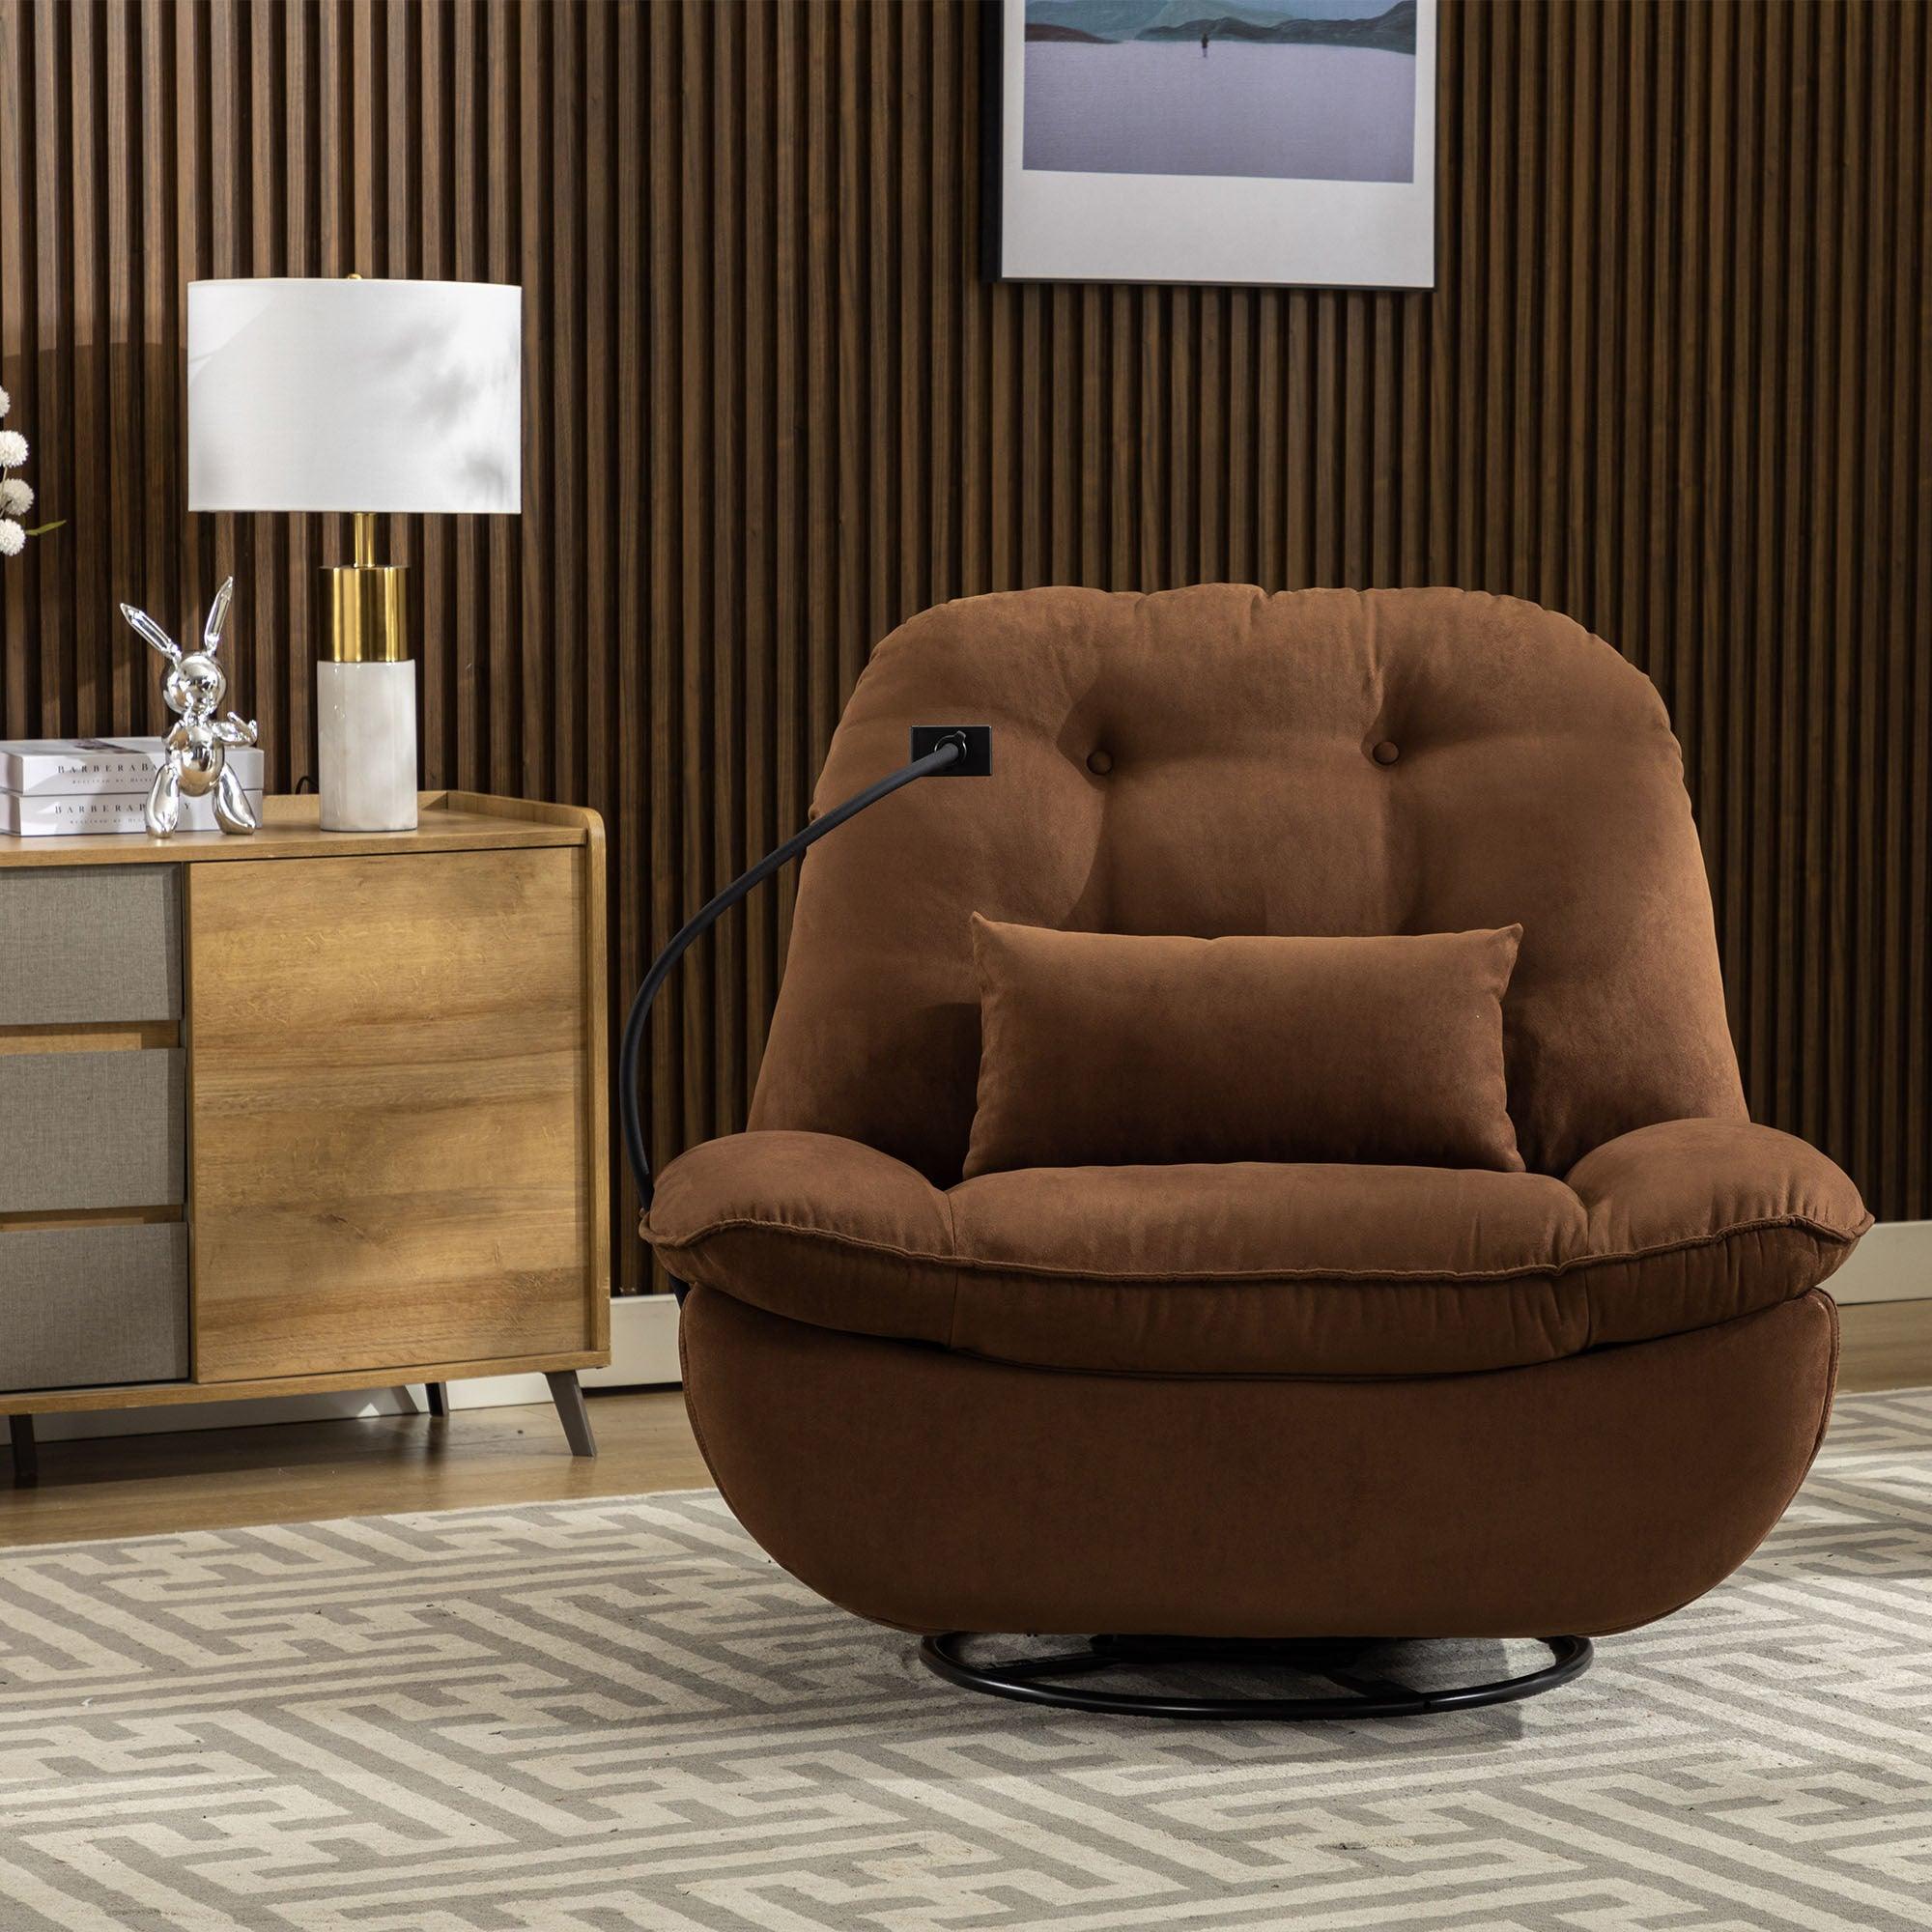 🆓🚛 Smart Power Recliner Sofa, Usb Charger With Bluetooth Swivel Single Chair With Voice Control Gaming Sleeping Working Hidden Arm Storage, Brown